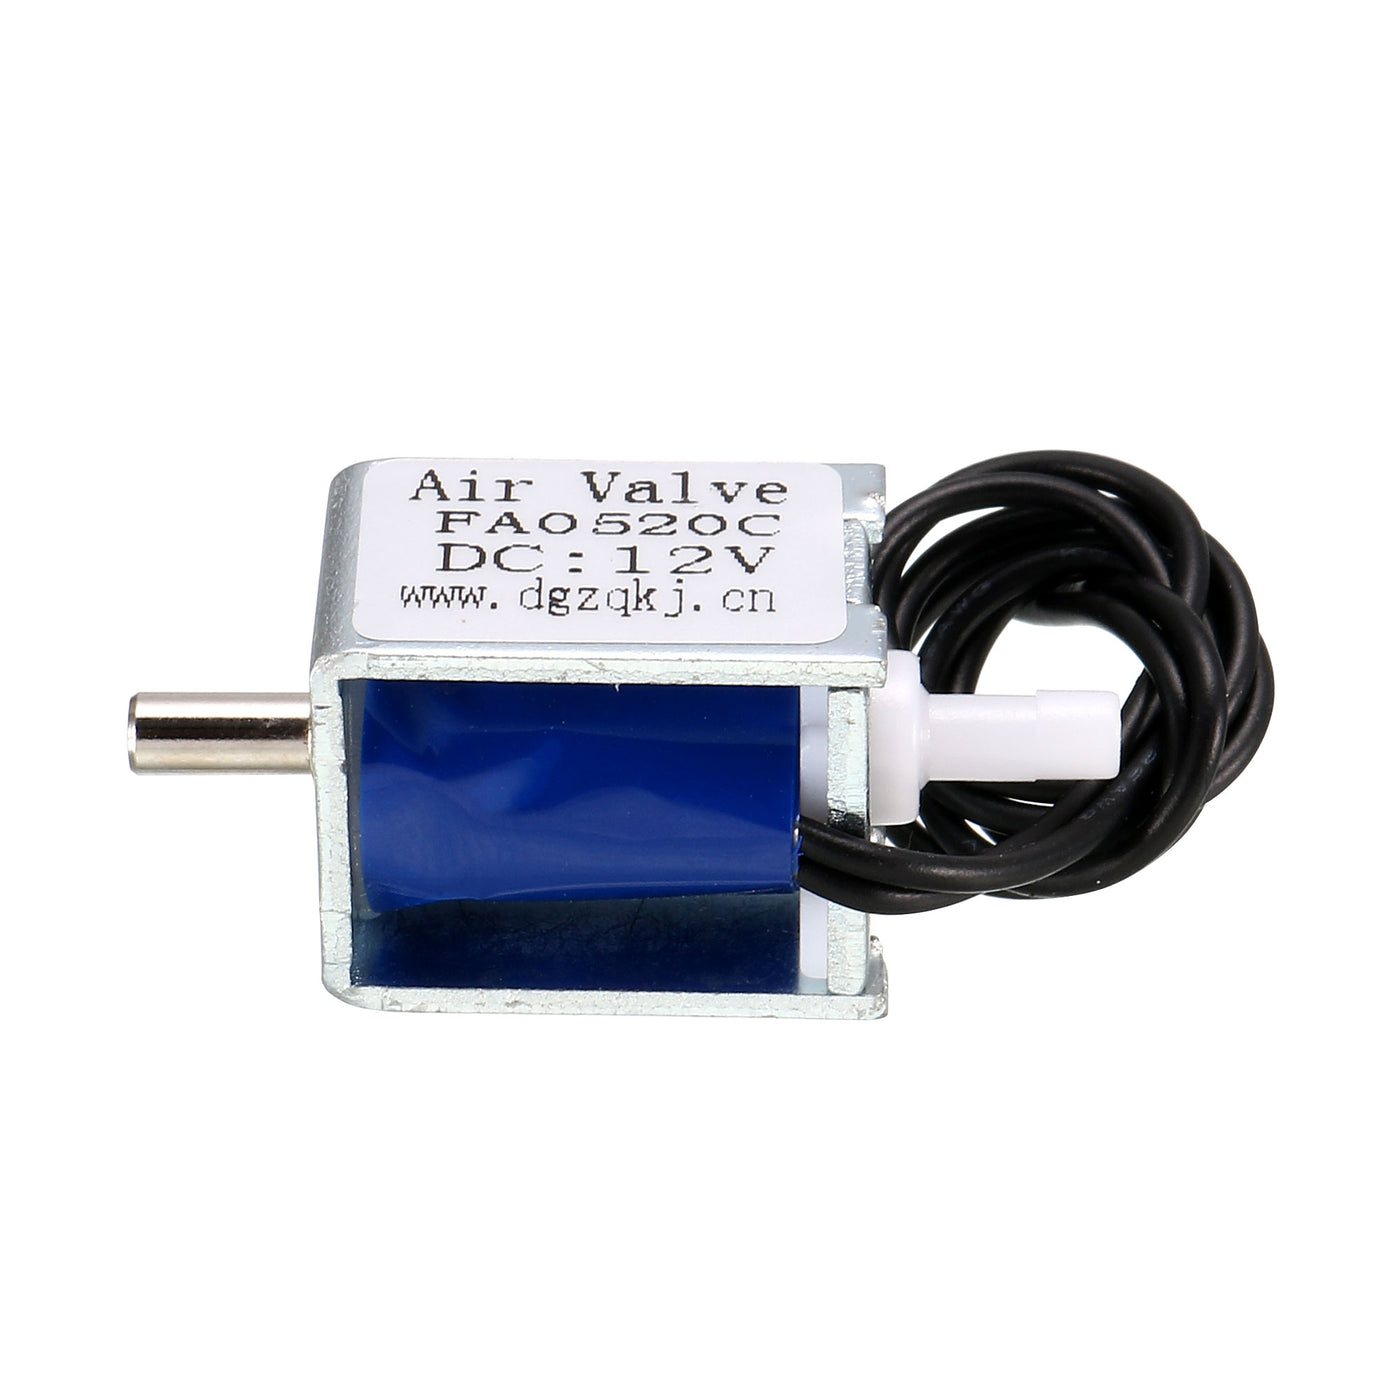 uxcell Uxcell Miniature Solenoid Valve 2 Way Normally Opened DC12V 45mA Air Solenoid Valve